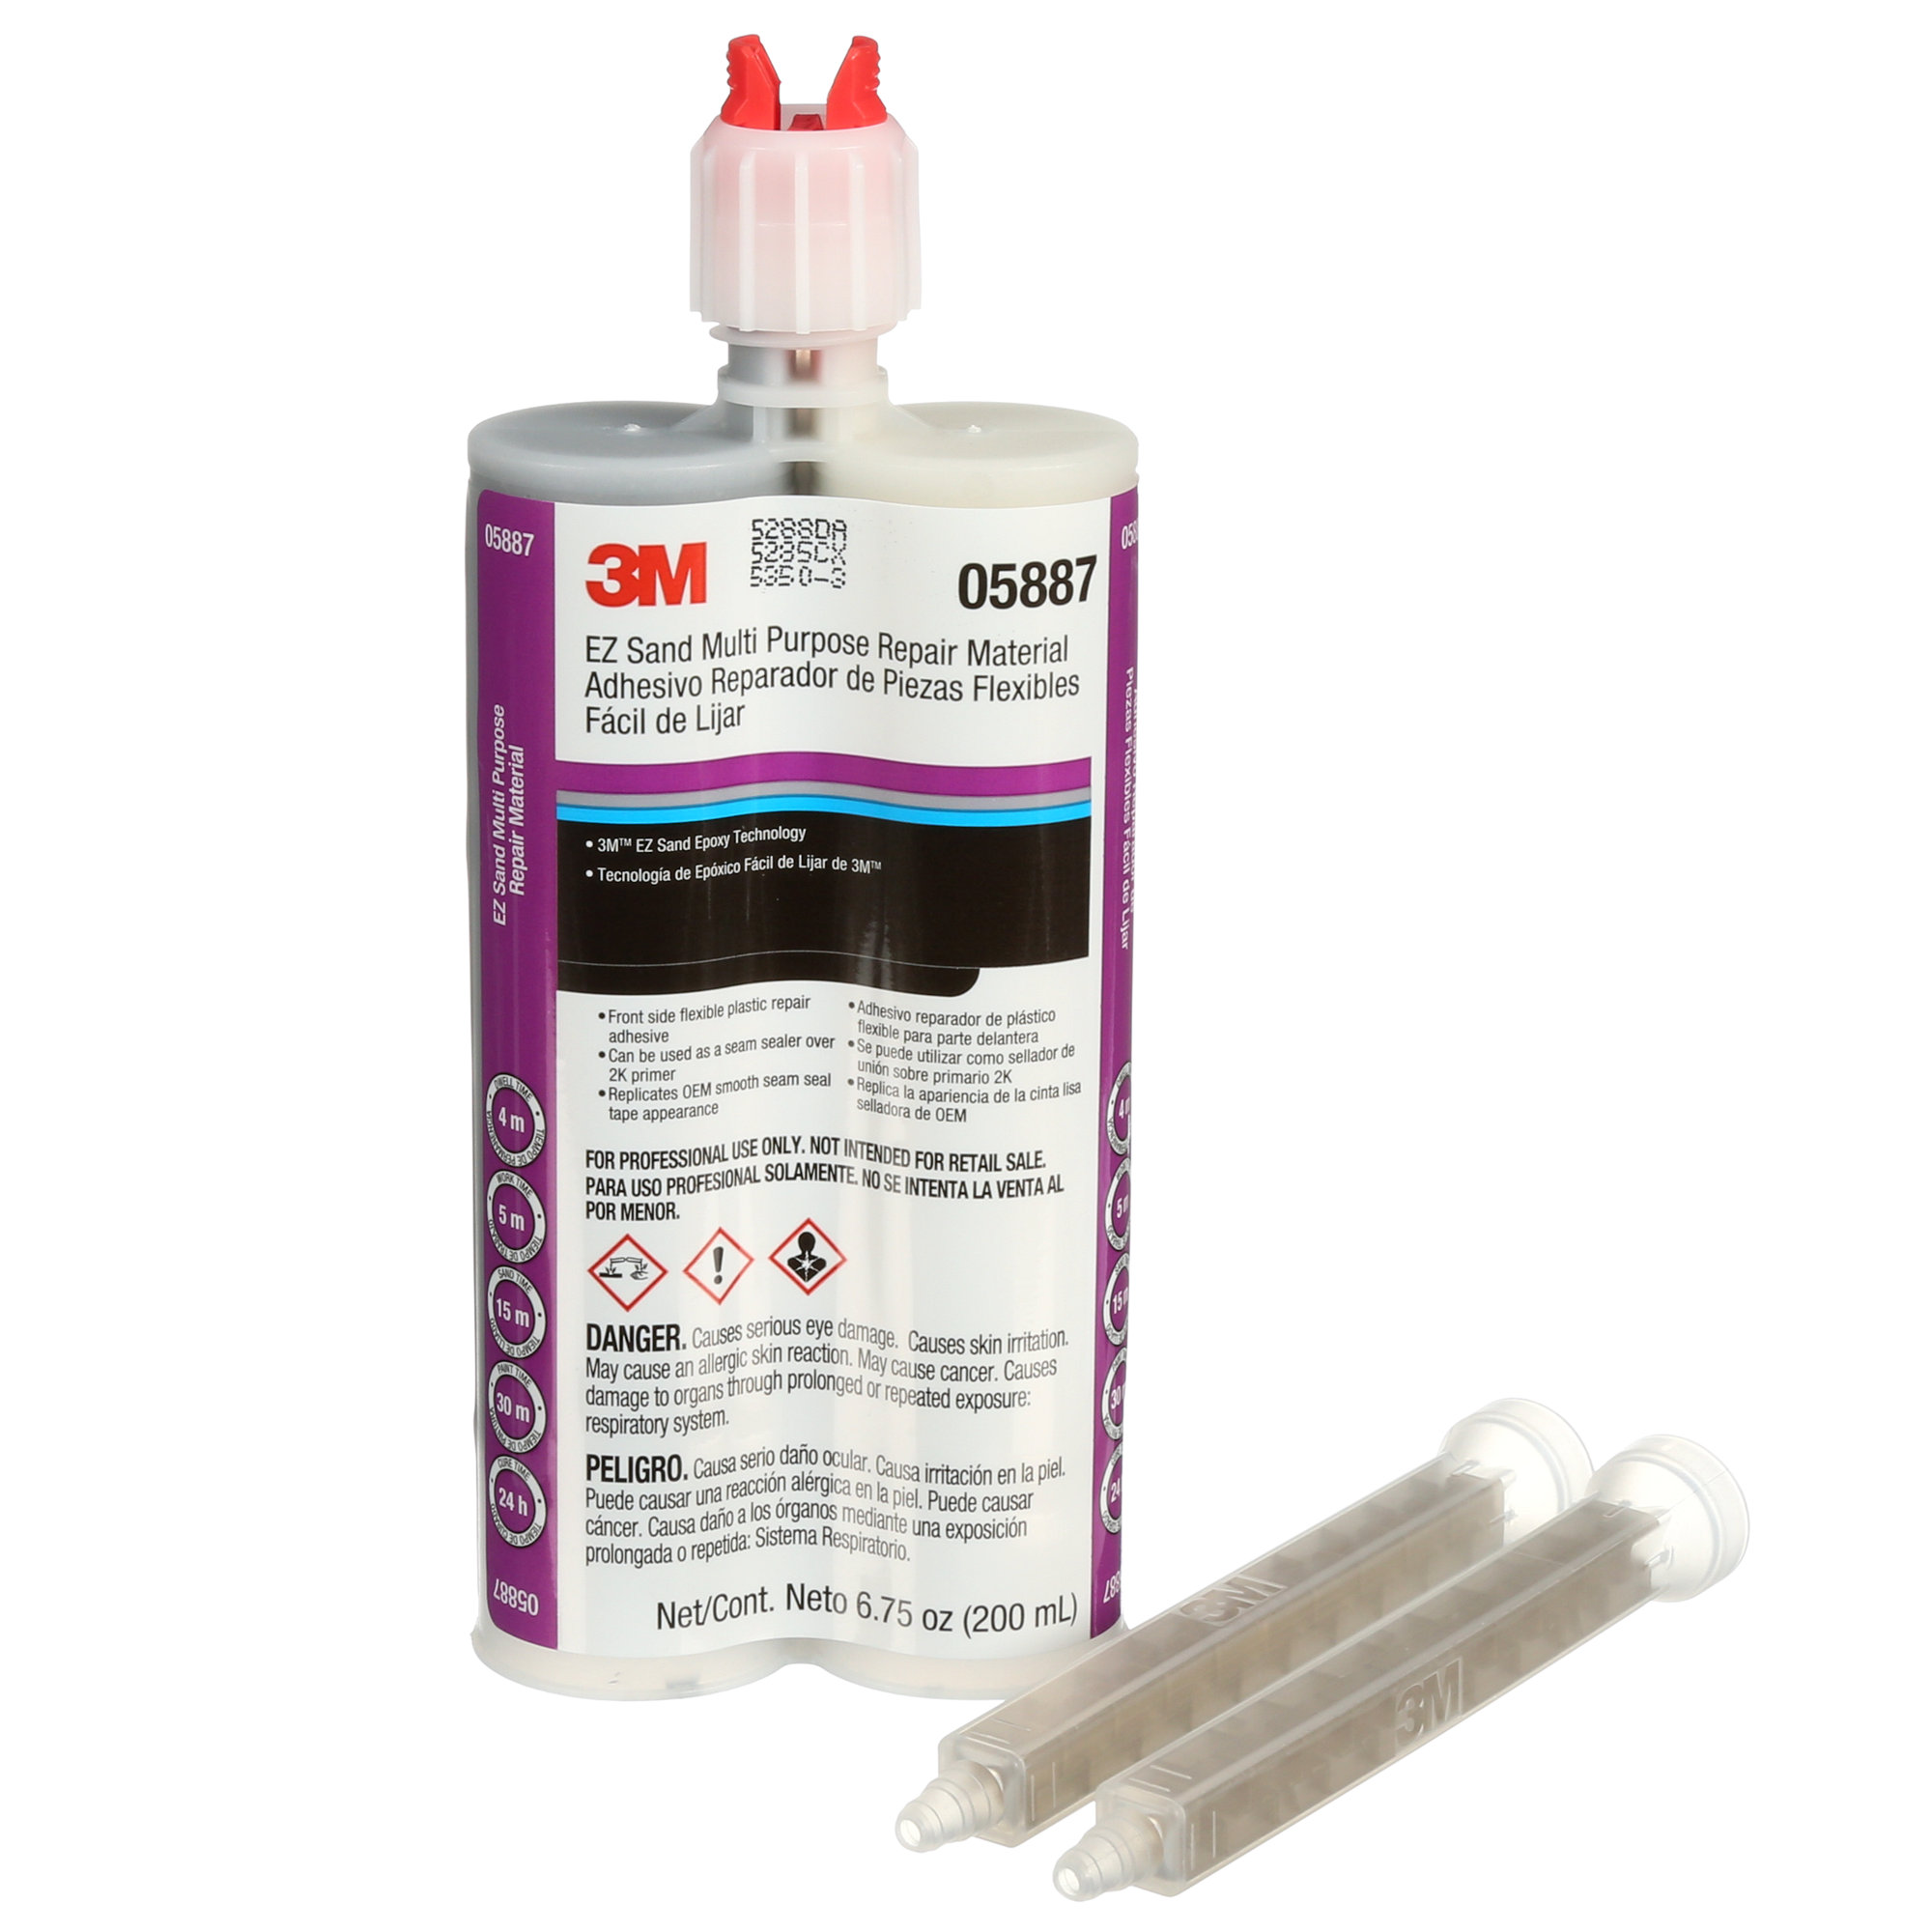 3M Surface Protection Materials